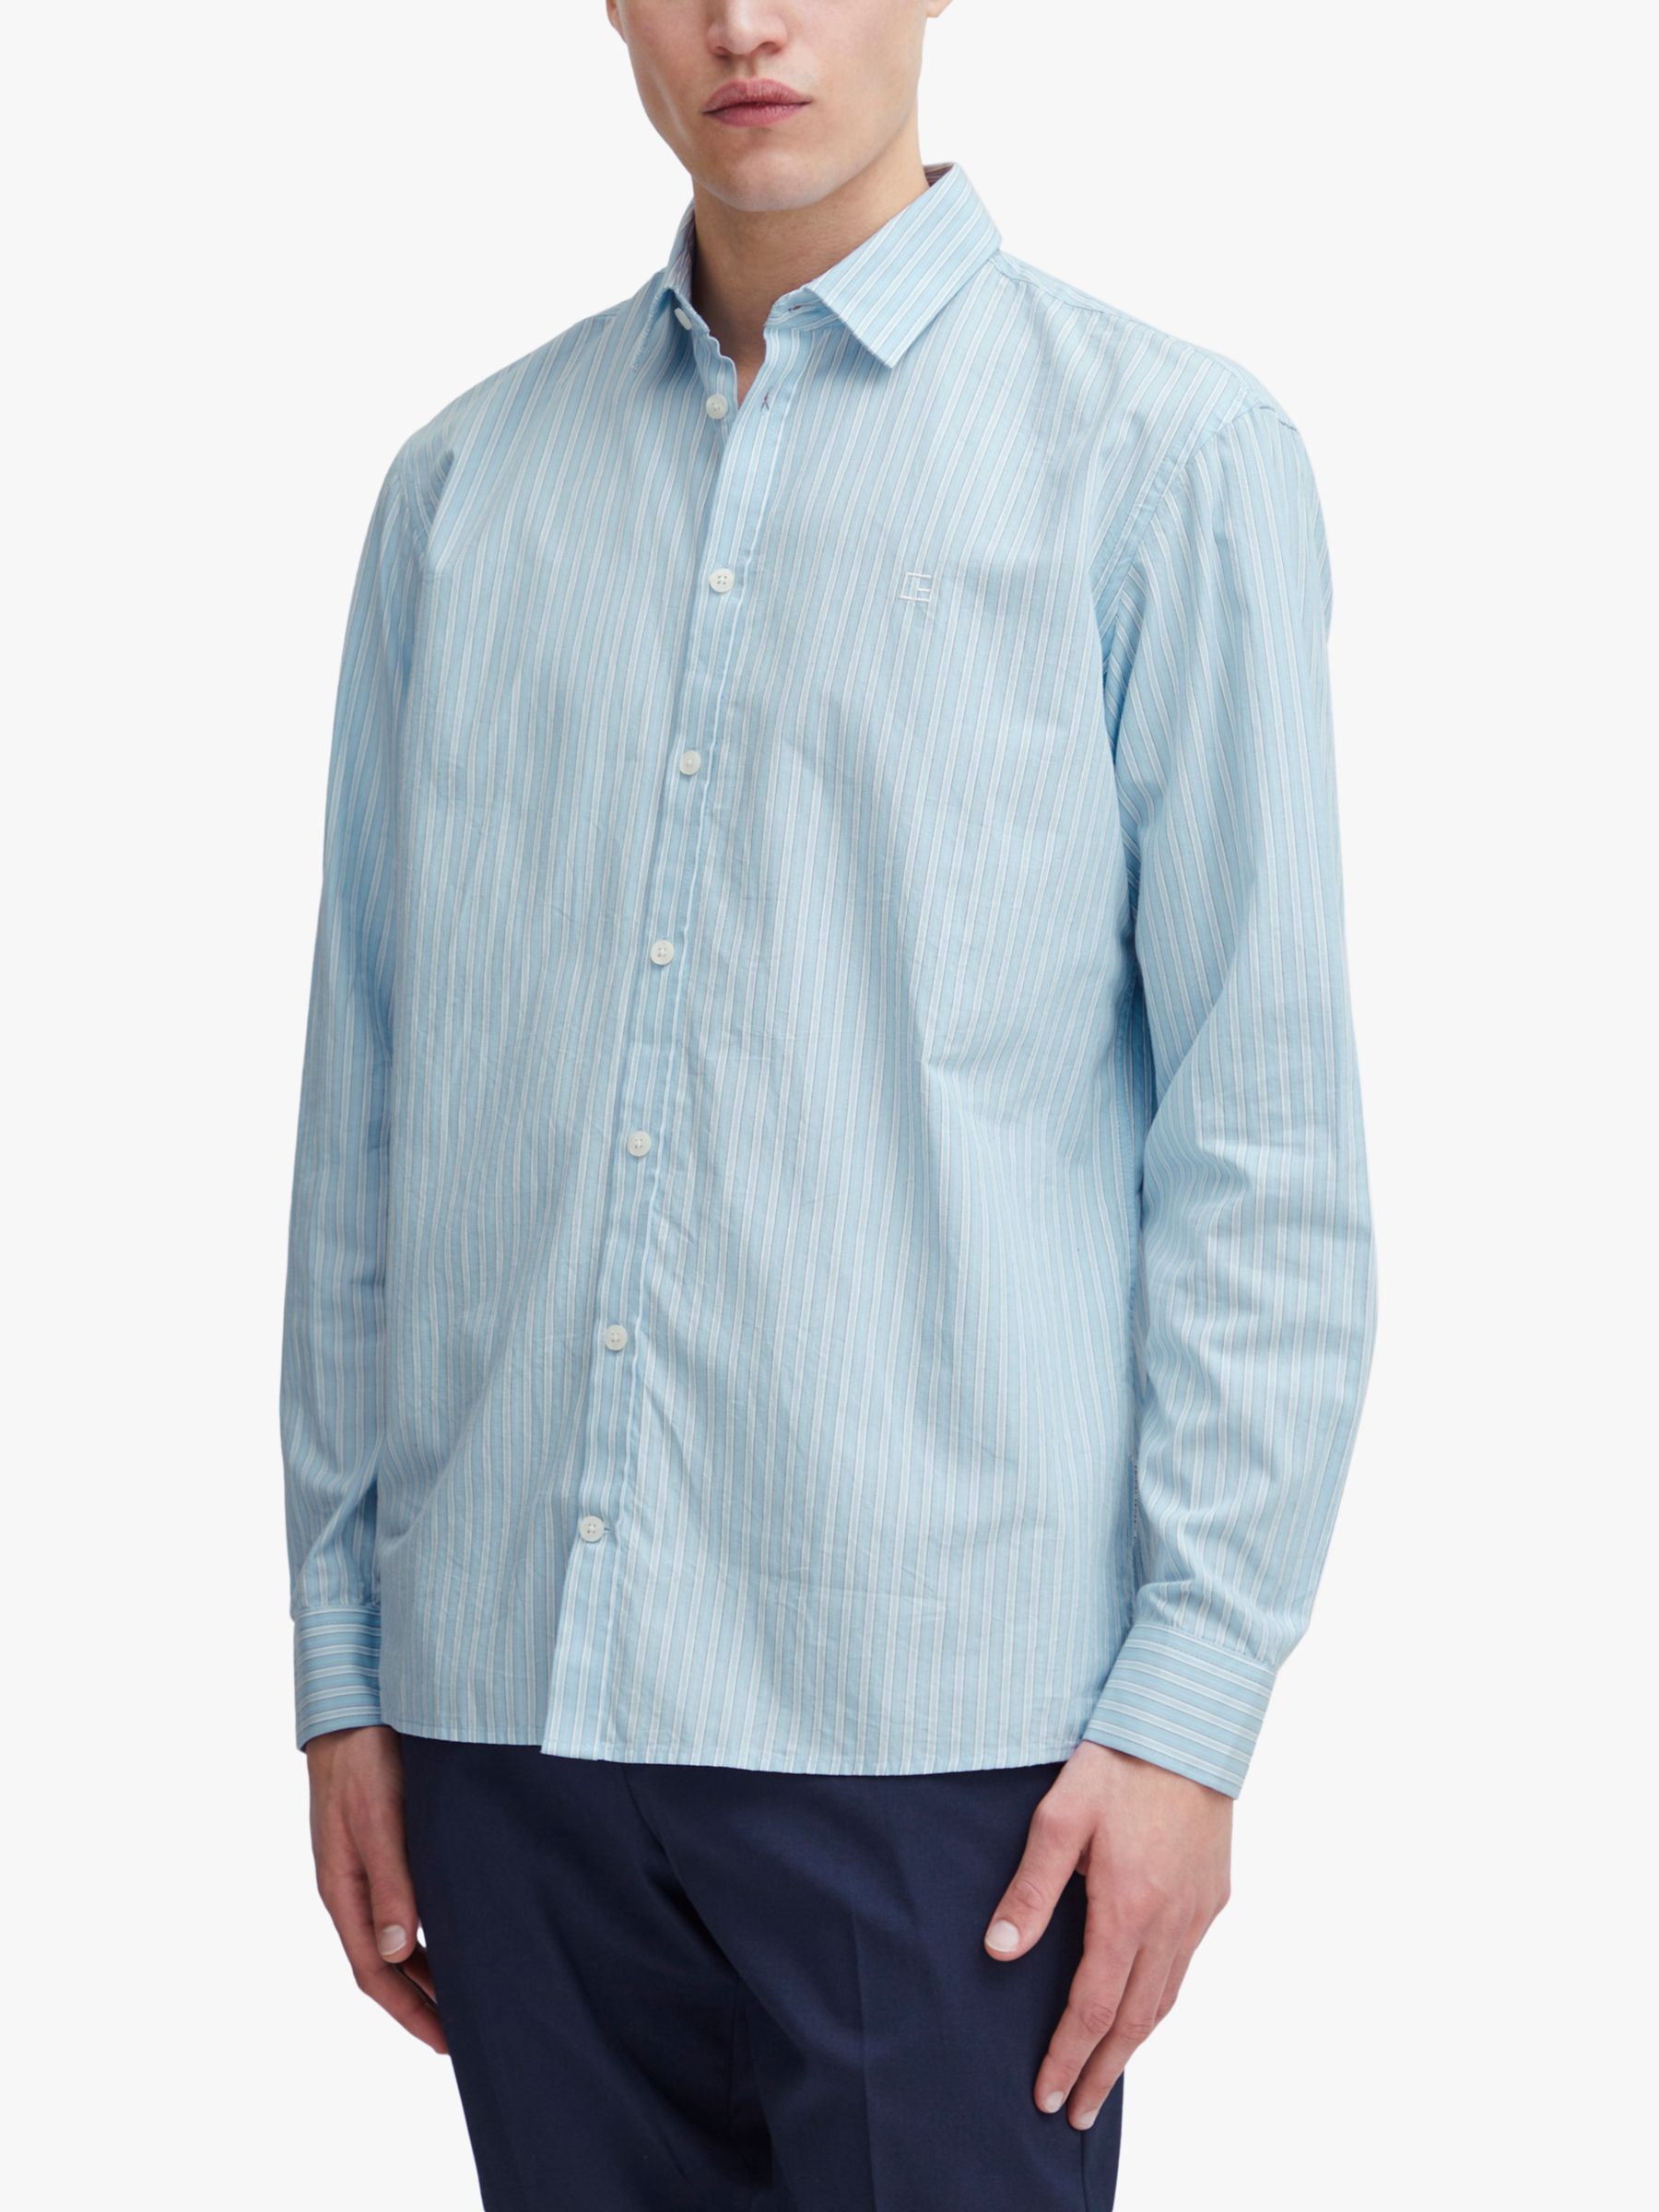 Casual Friday Alvin Long Sleeve Striped Shirt, Chambray Blue, S